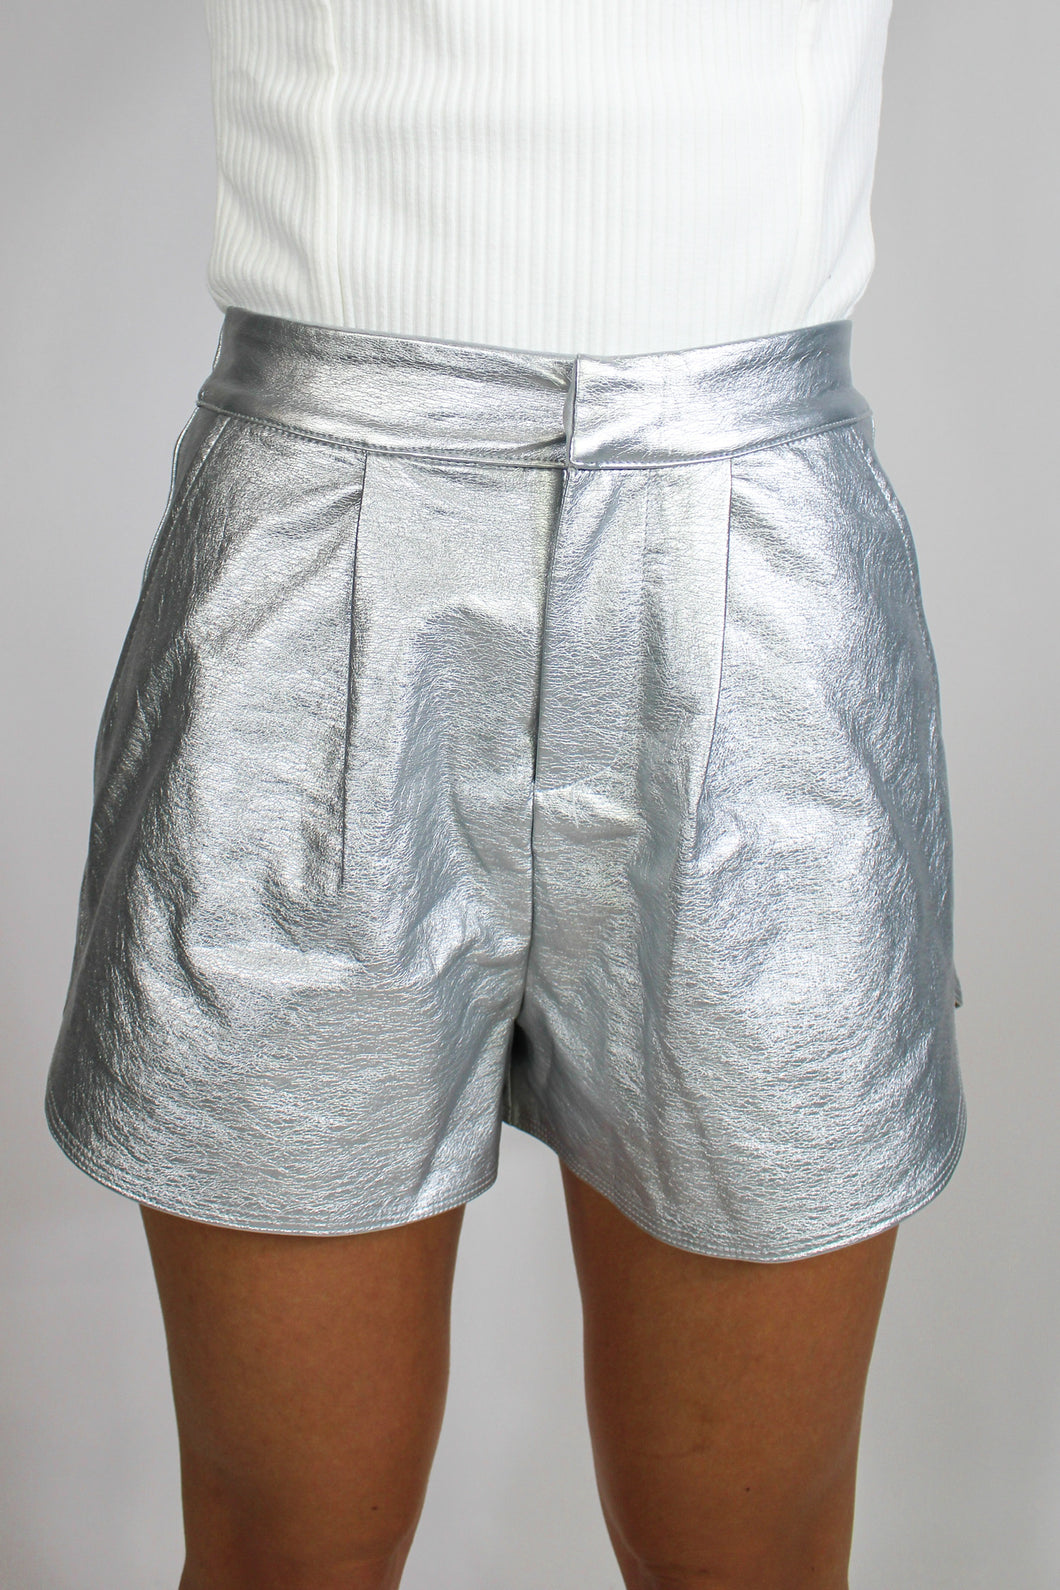 New Year Sparkles Shorts